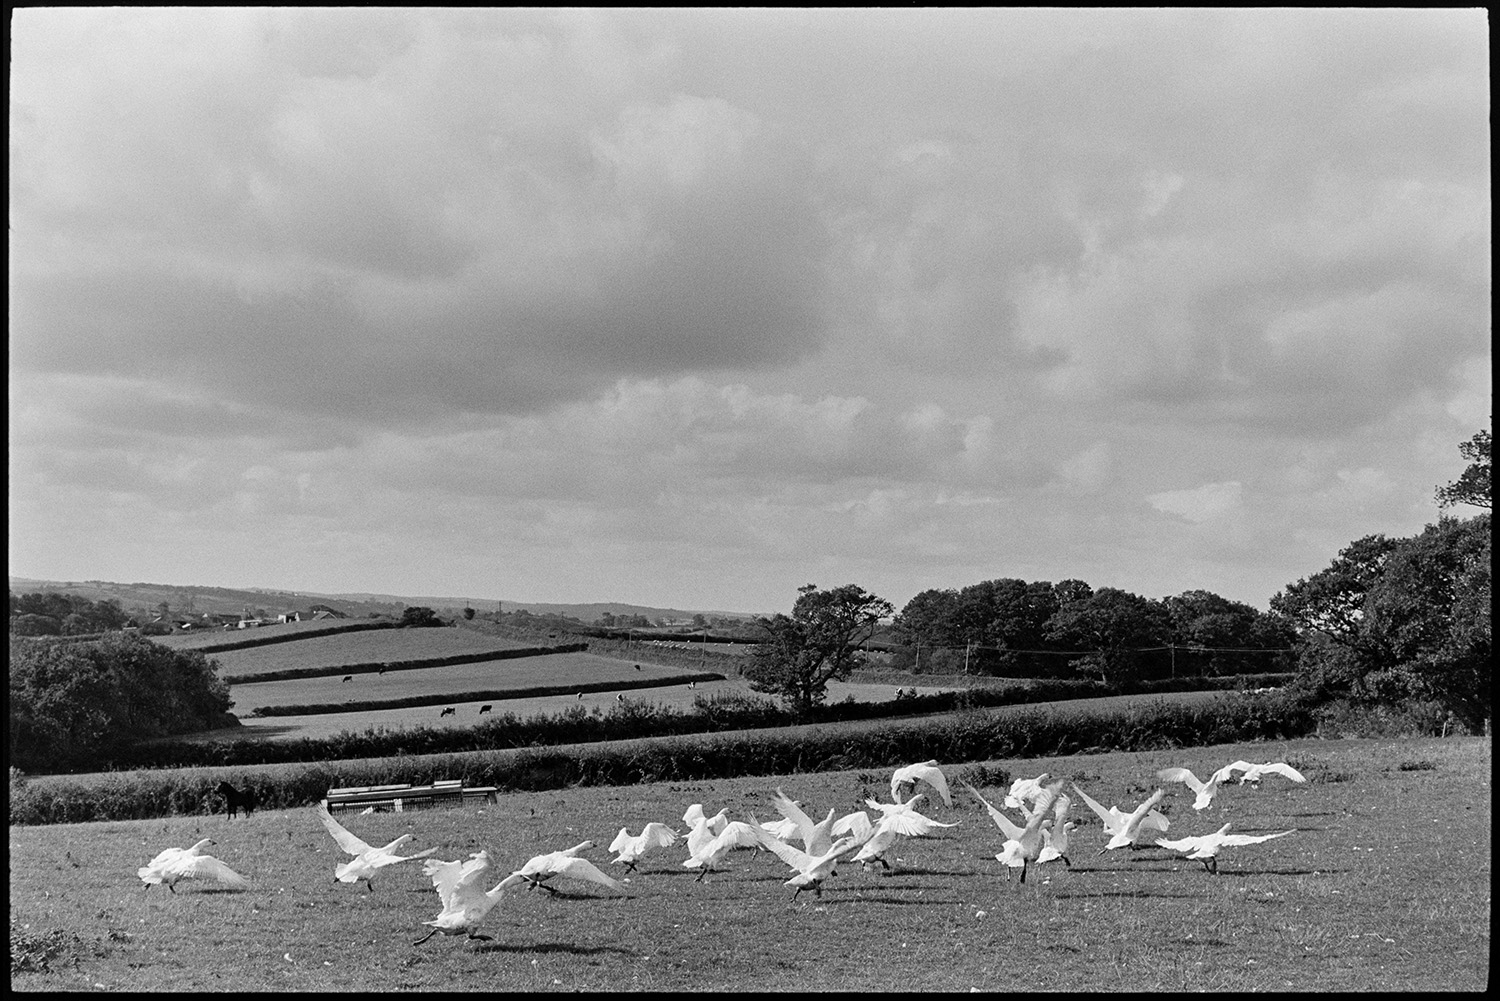 Flock of geese taking off.
[A flock of geese taking off from a field at Ingleigh Green. A view of fields, hedgerows and clouds is visible in the background.]